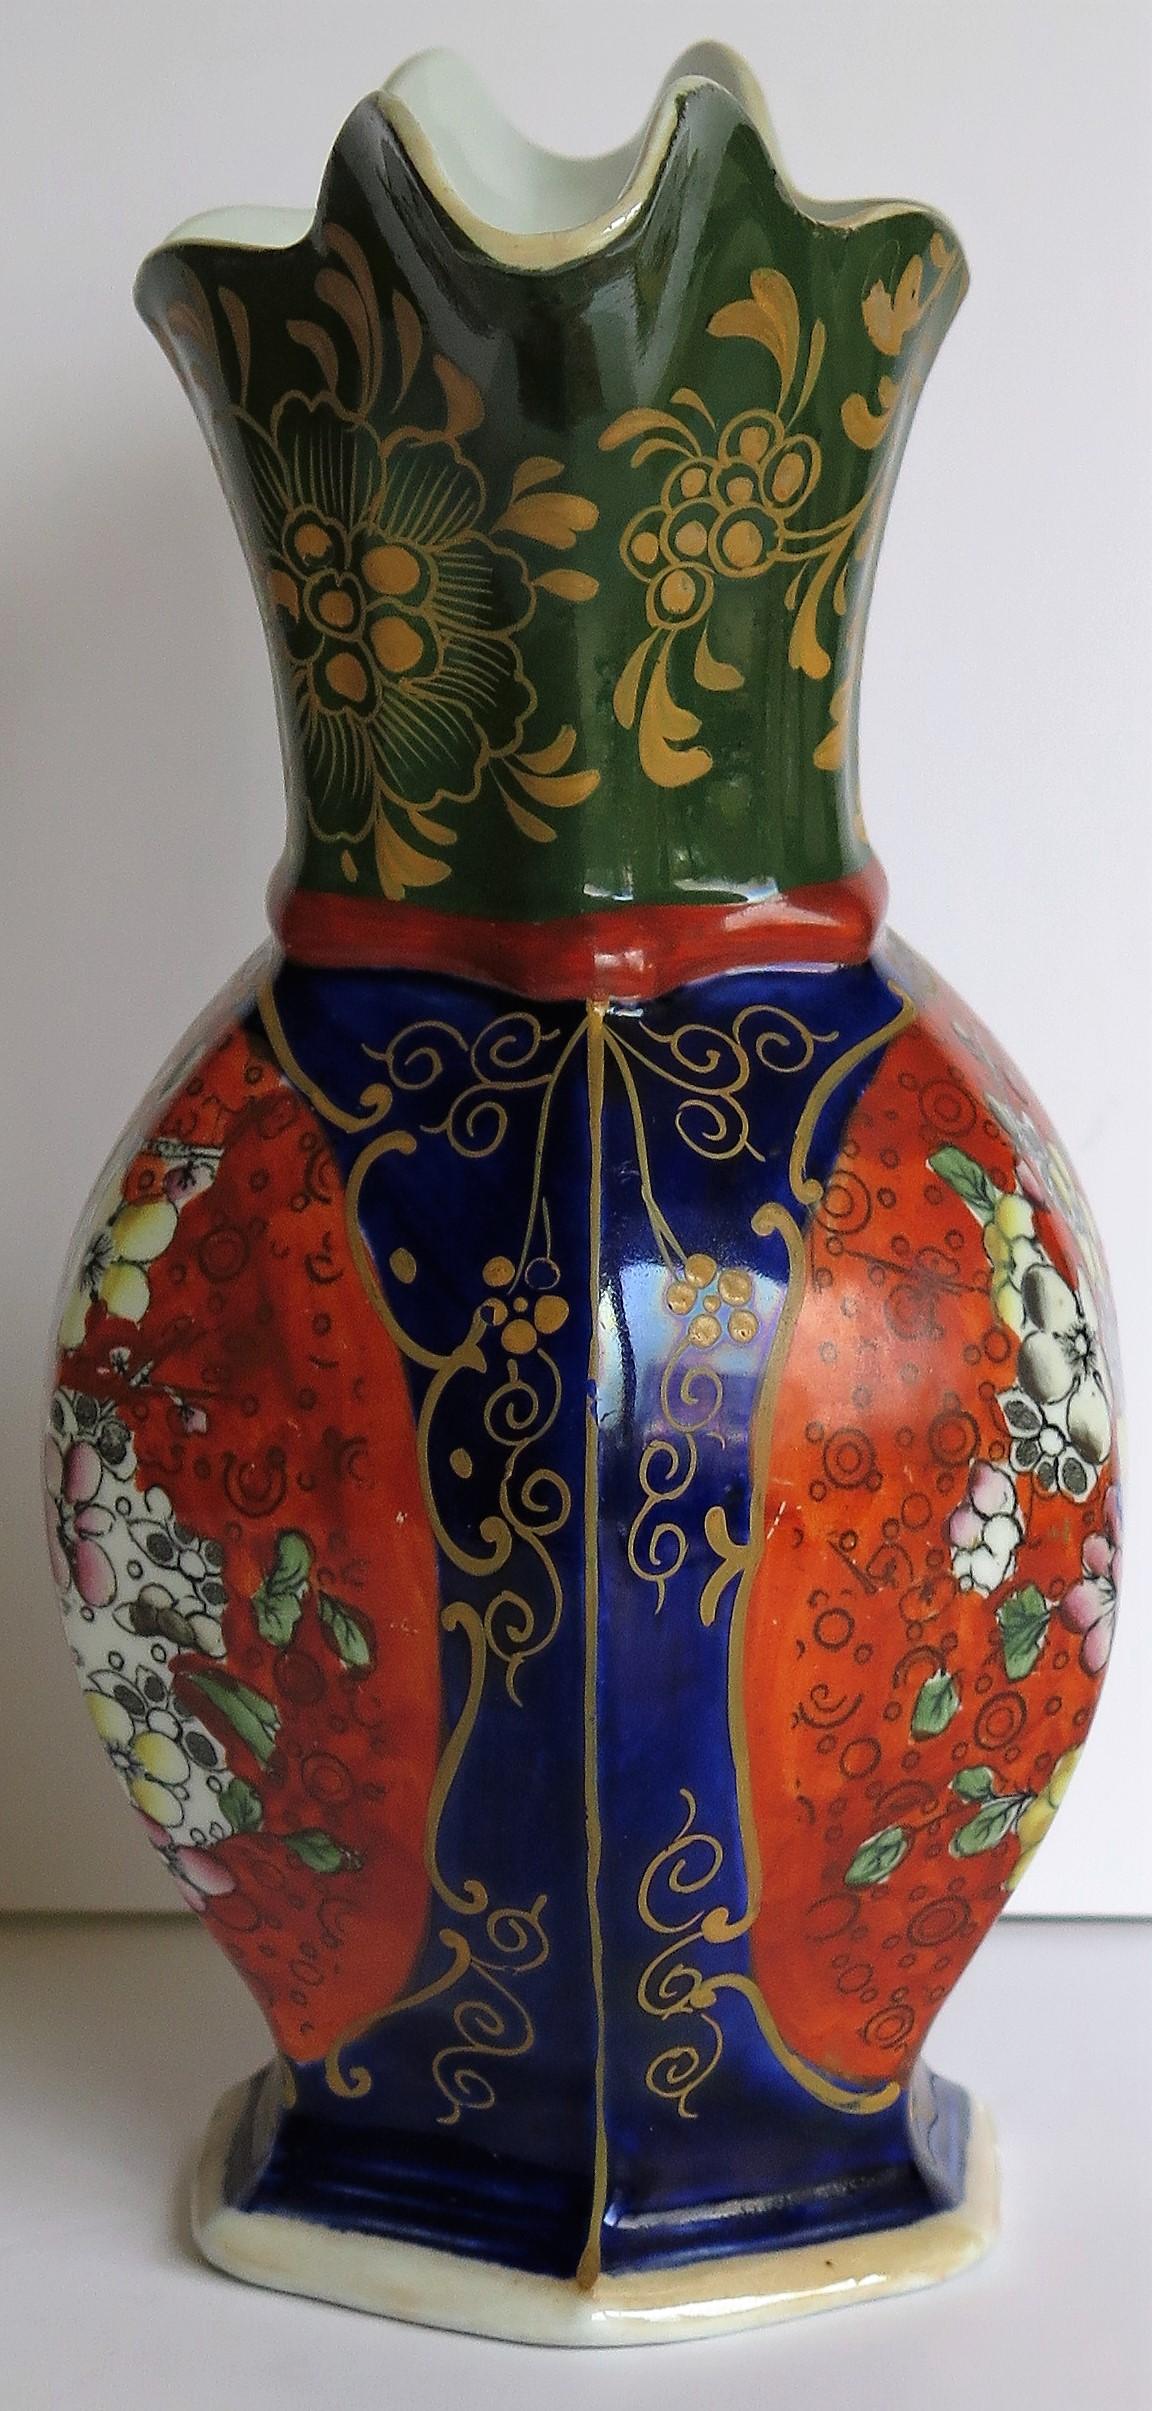 Mason's Ironstone Vase Hand Painted in Landscape and Prunus Pattern, circa 1830 3